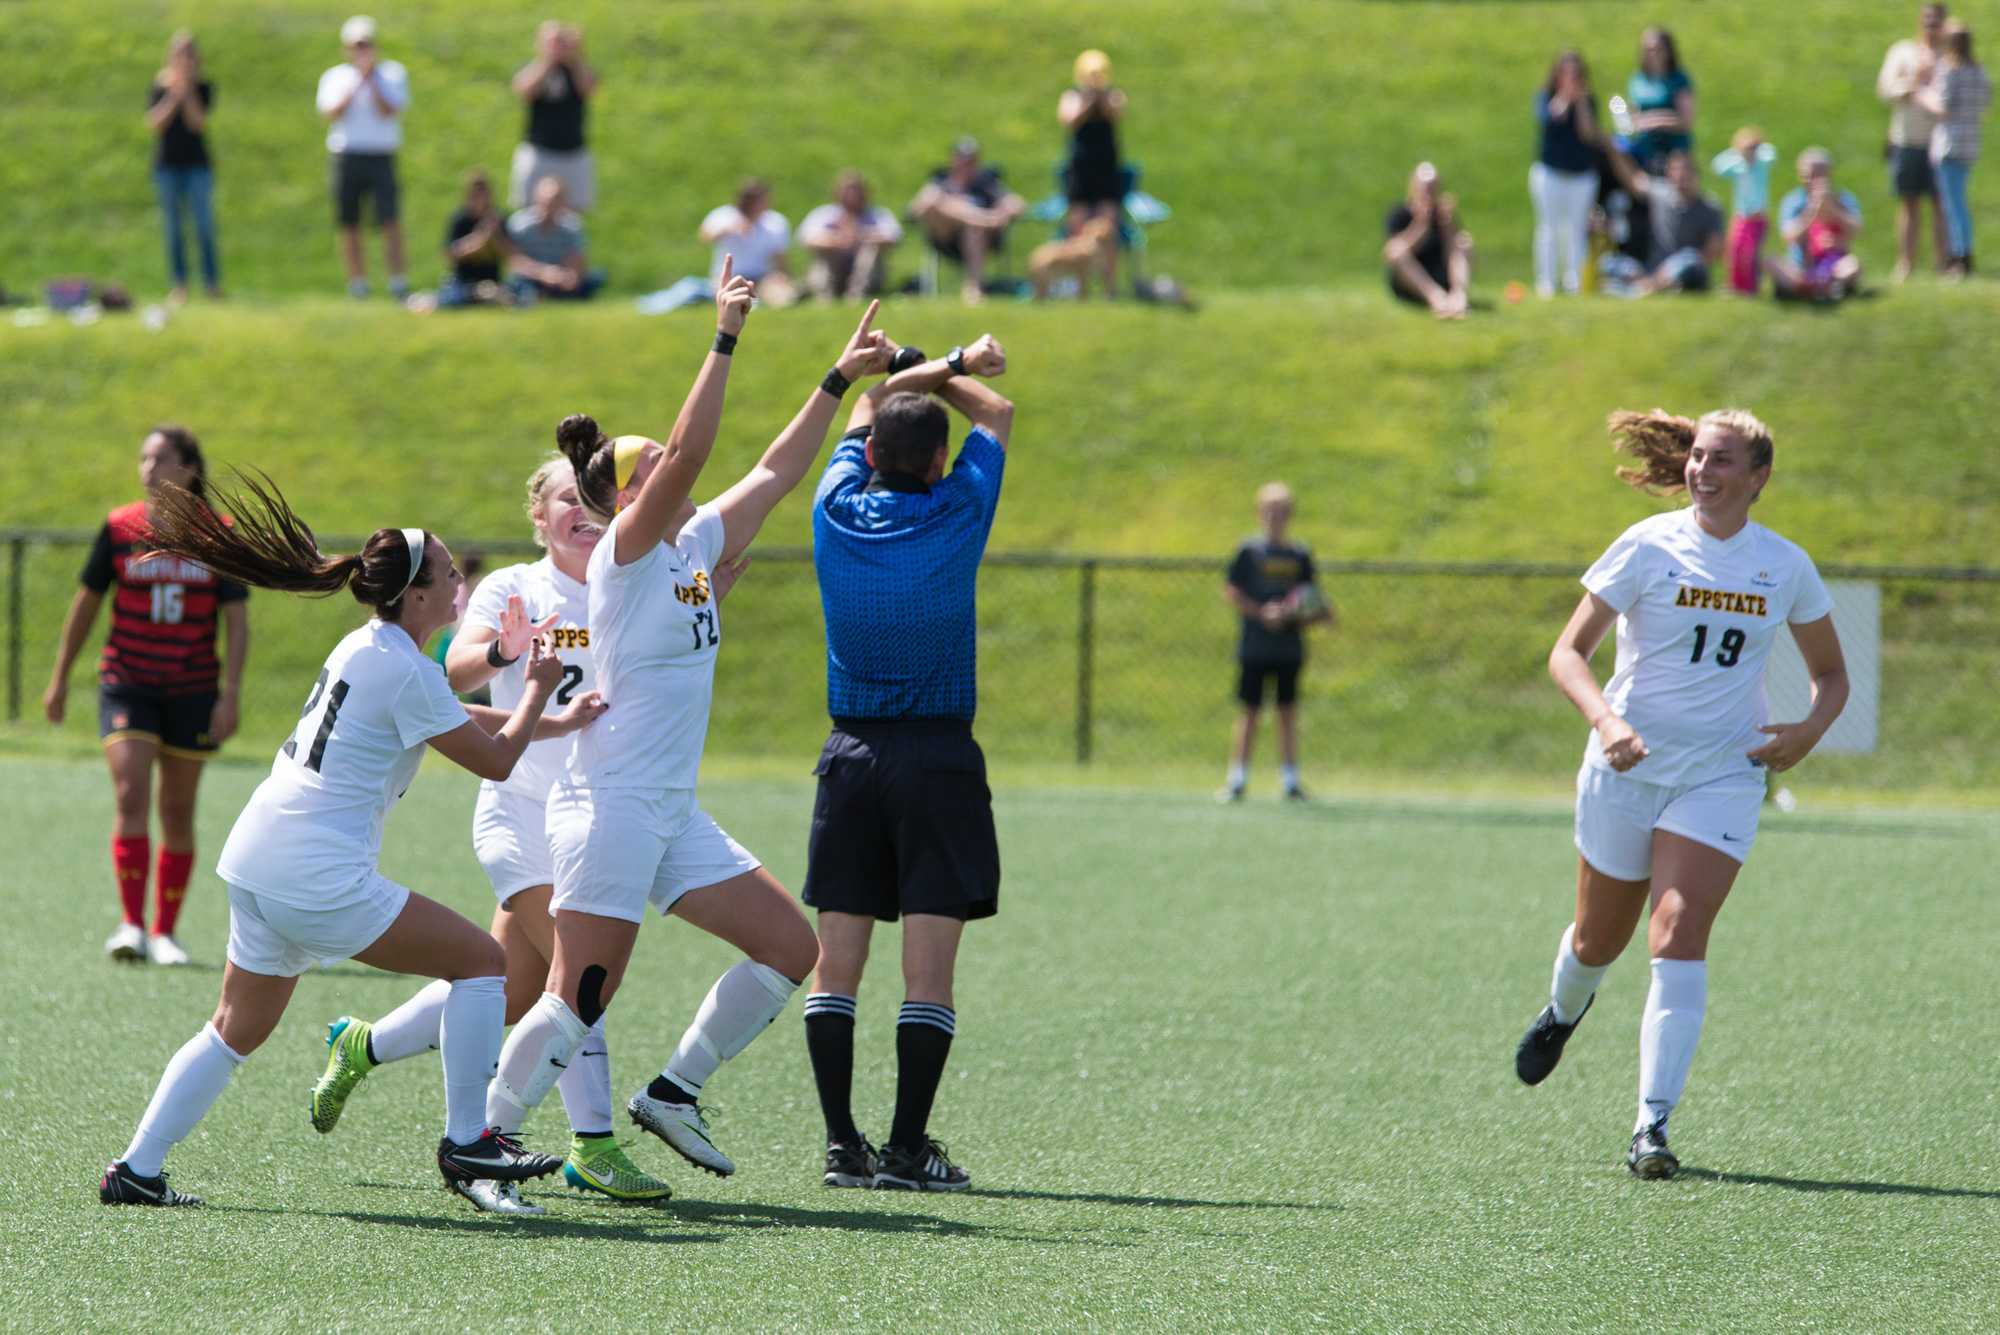 Senior defense #21 Aubrey Fletcher, junior midfield #20 Morgan Mosack, redshirt sophomore forward #12 Erin Settle and sophomore midfield/forward #19 Emmily Cowie celebrate Settles goal against Maryland. Settle scored the teams first goal of the game in the second half. Photo by Dallas Linger, Photo Editor